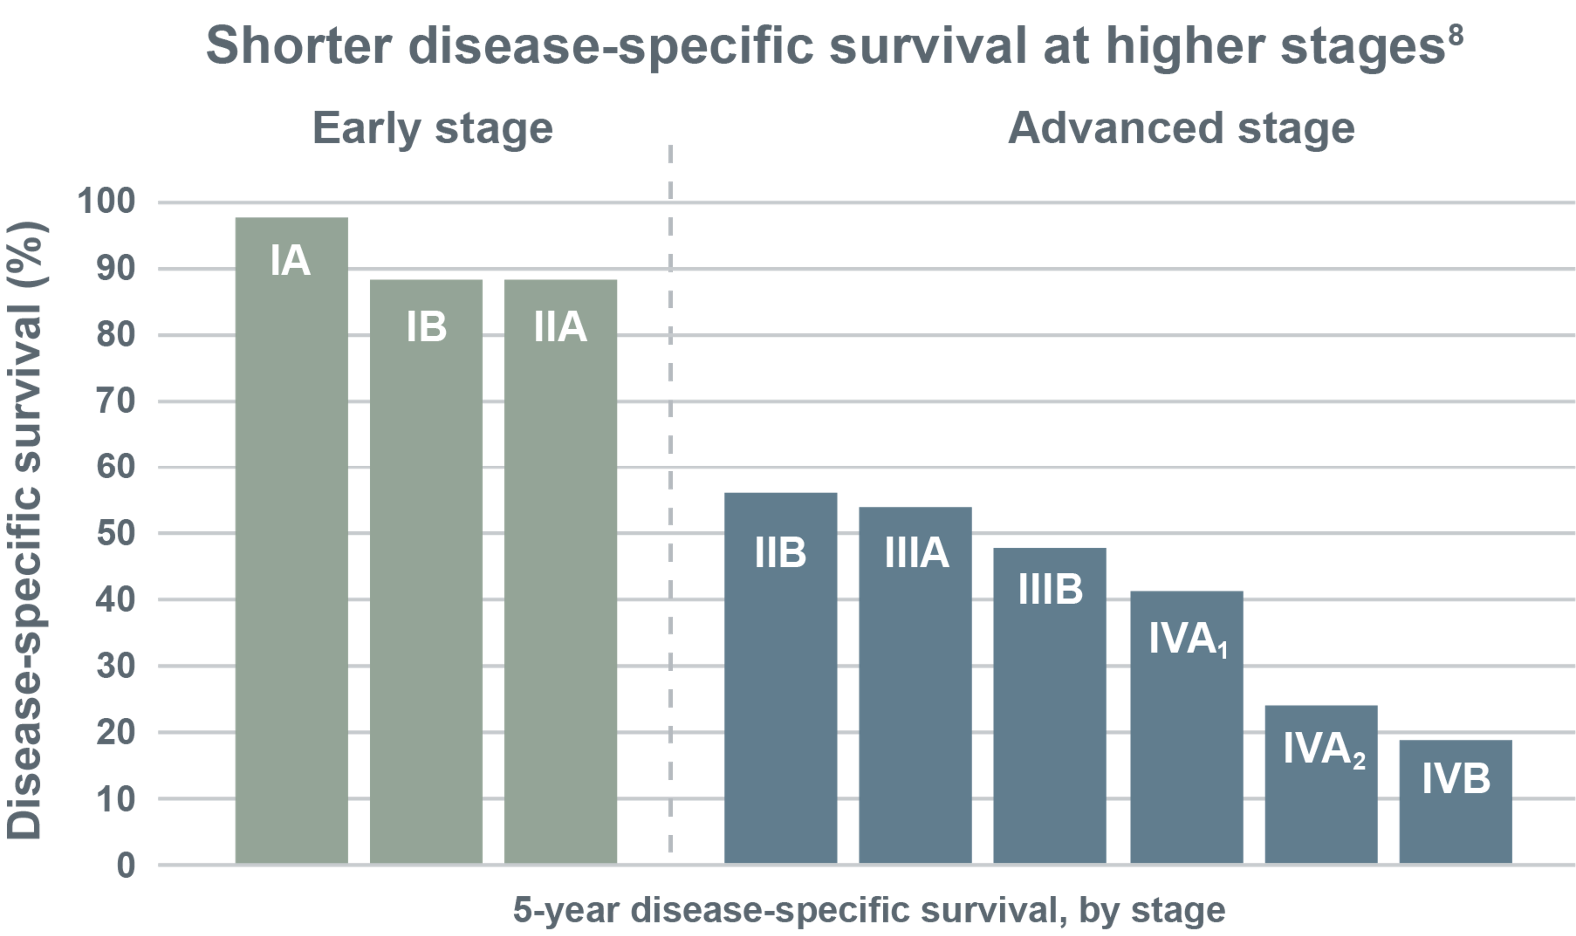  Chart showing shorter disease-specific survival at higher stages of mycosis fungoides and Sézary syndrome. From Agar, et al, J Clin Oncol, 2010.